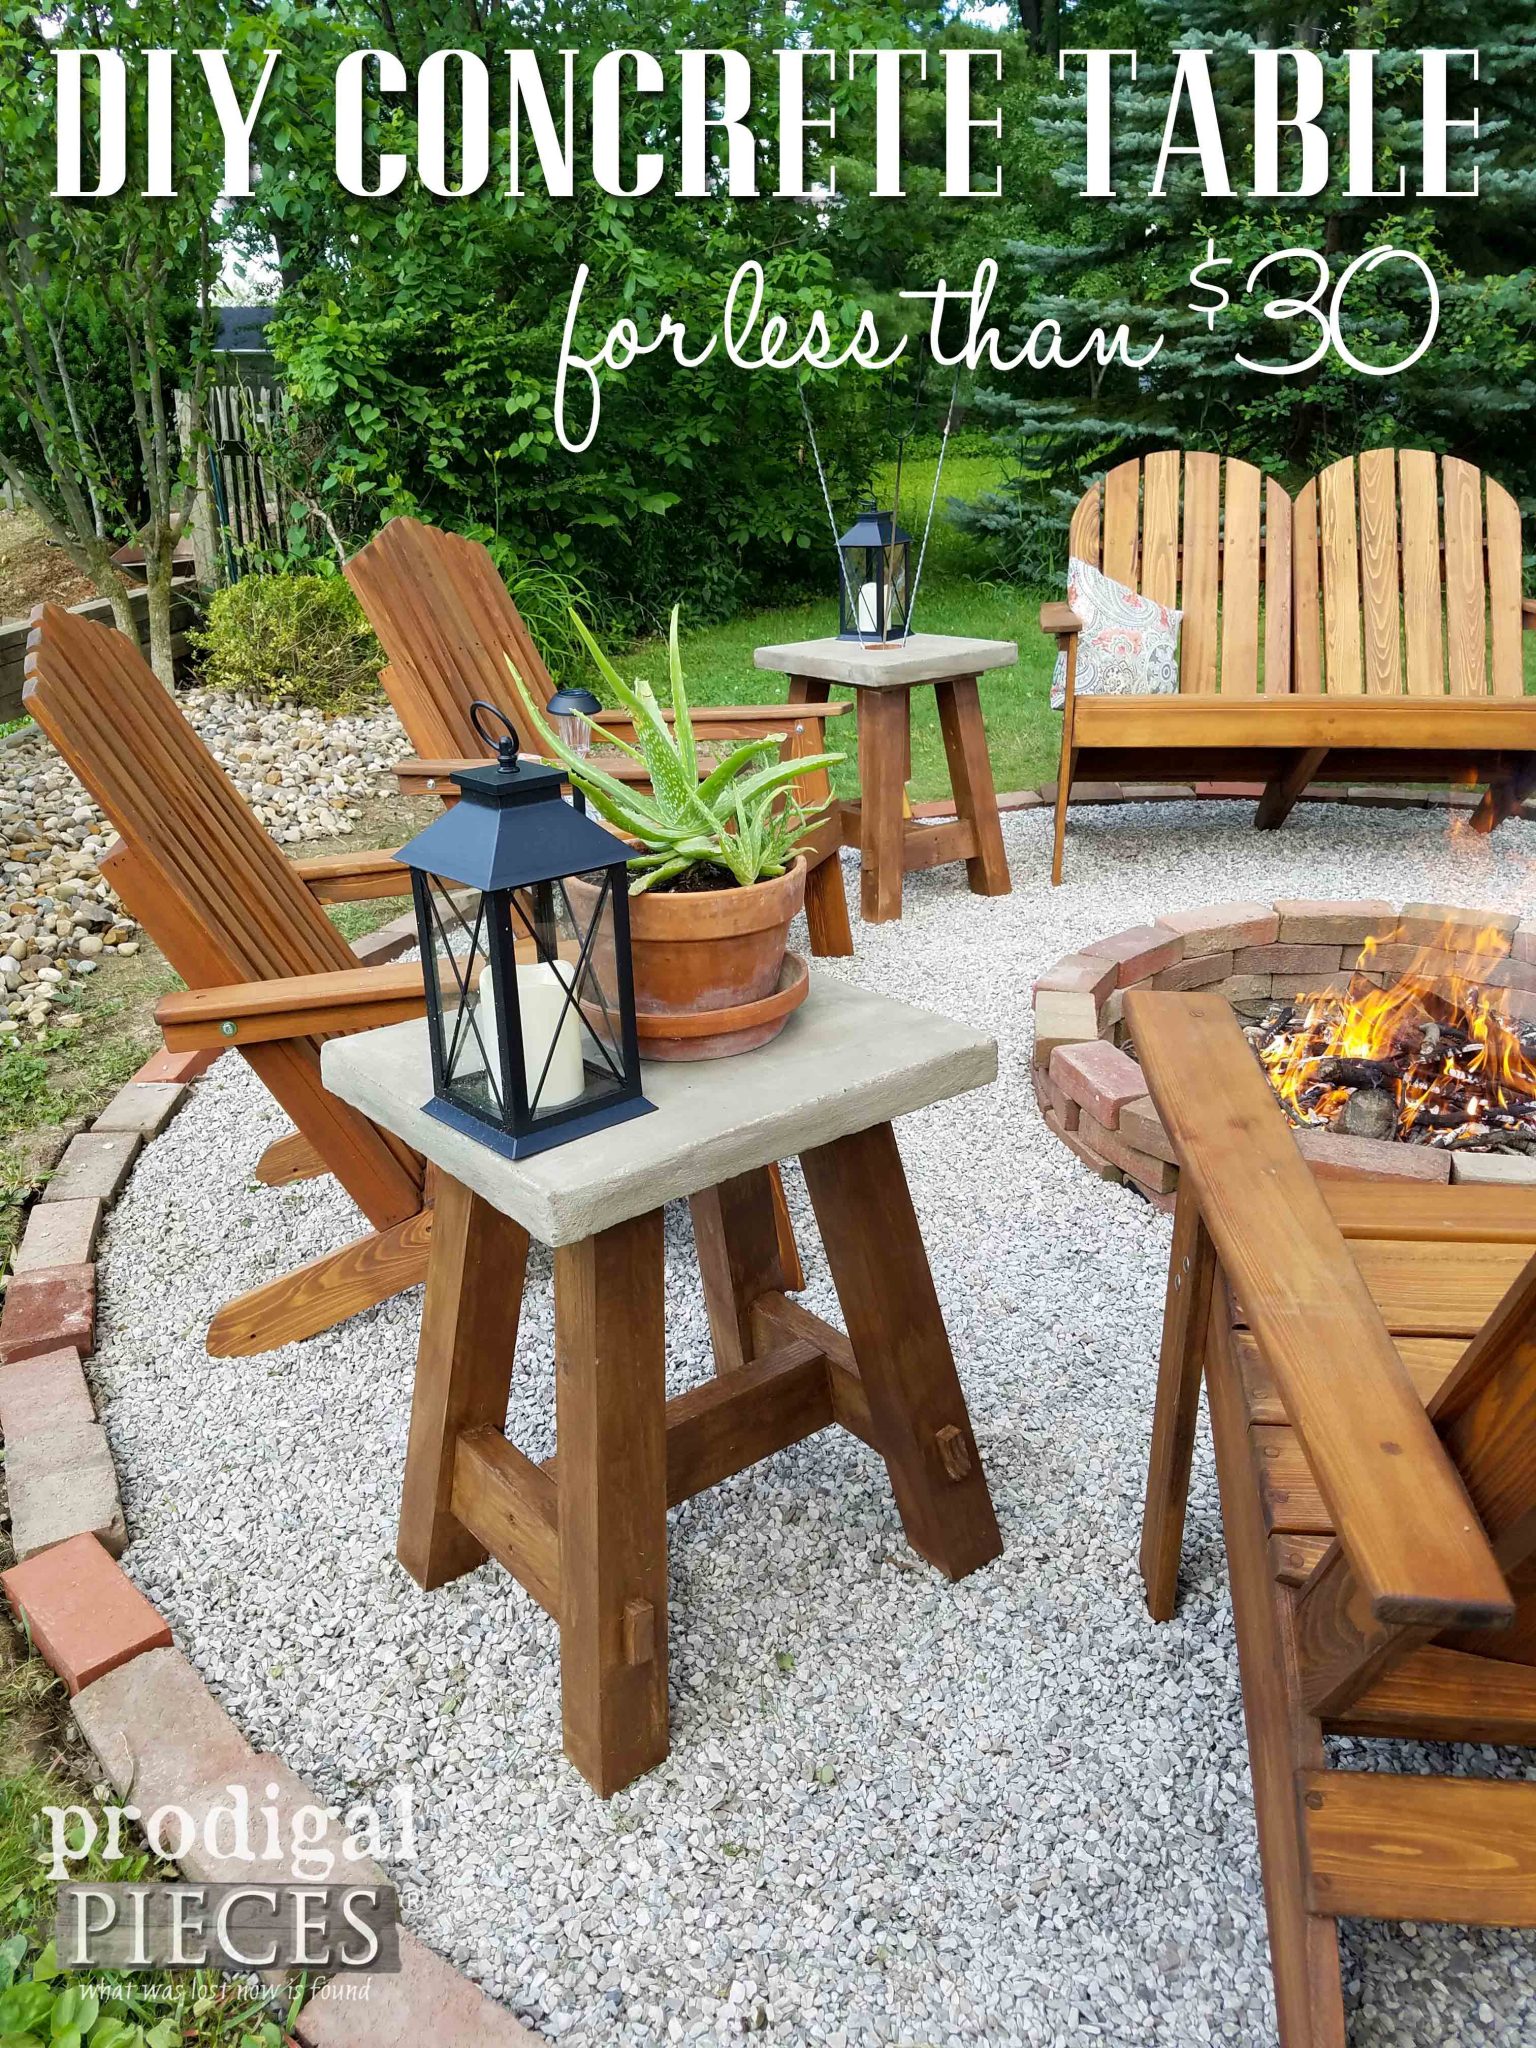 Build this Concrete Table for Less than $30. Easy-to-follow build plans by Prodigal Pieces | prodigalpieces.com